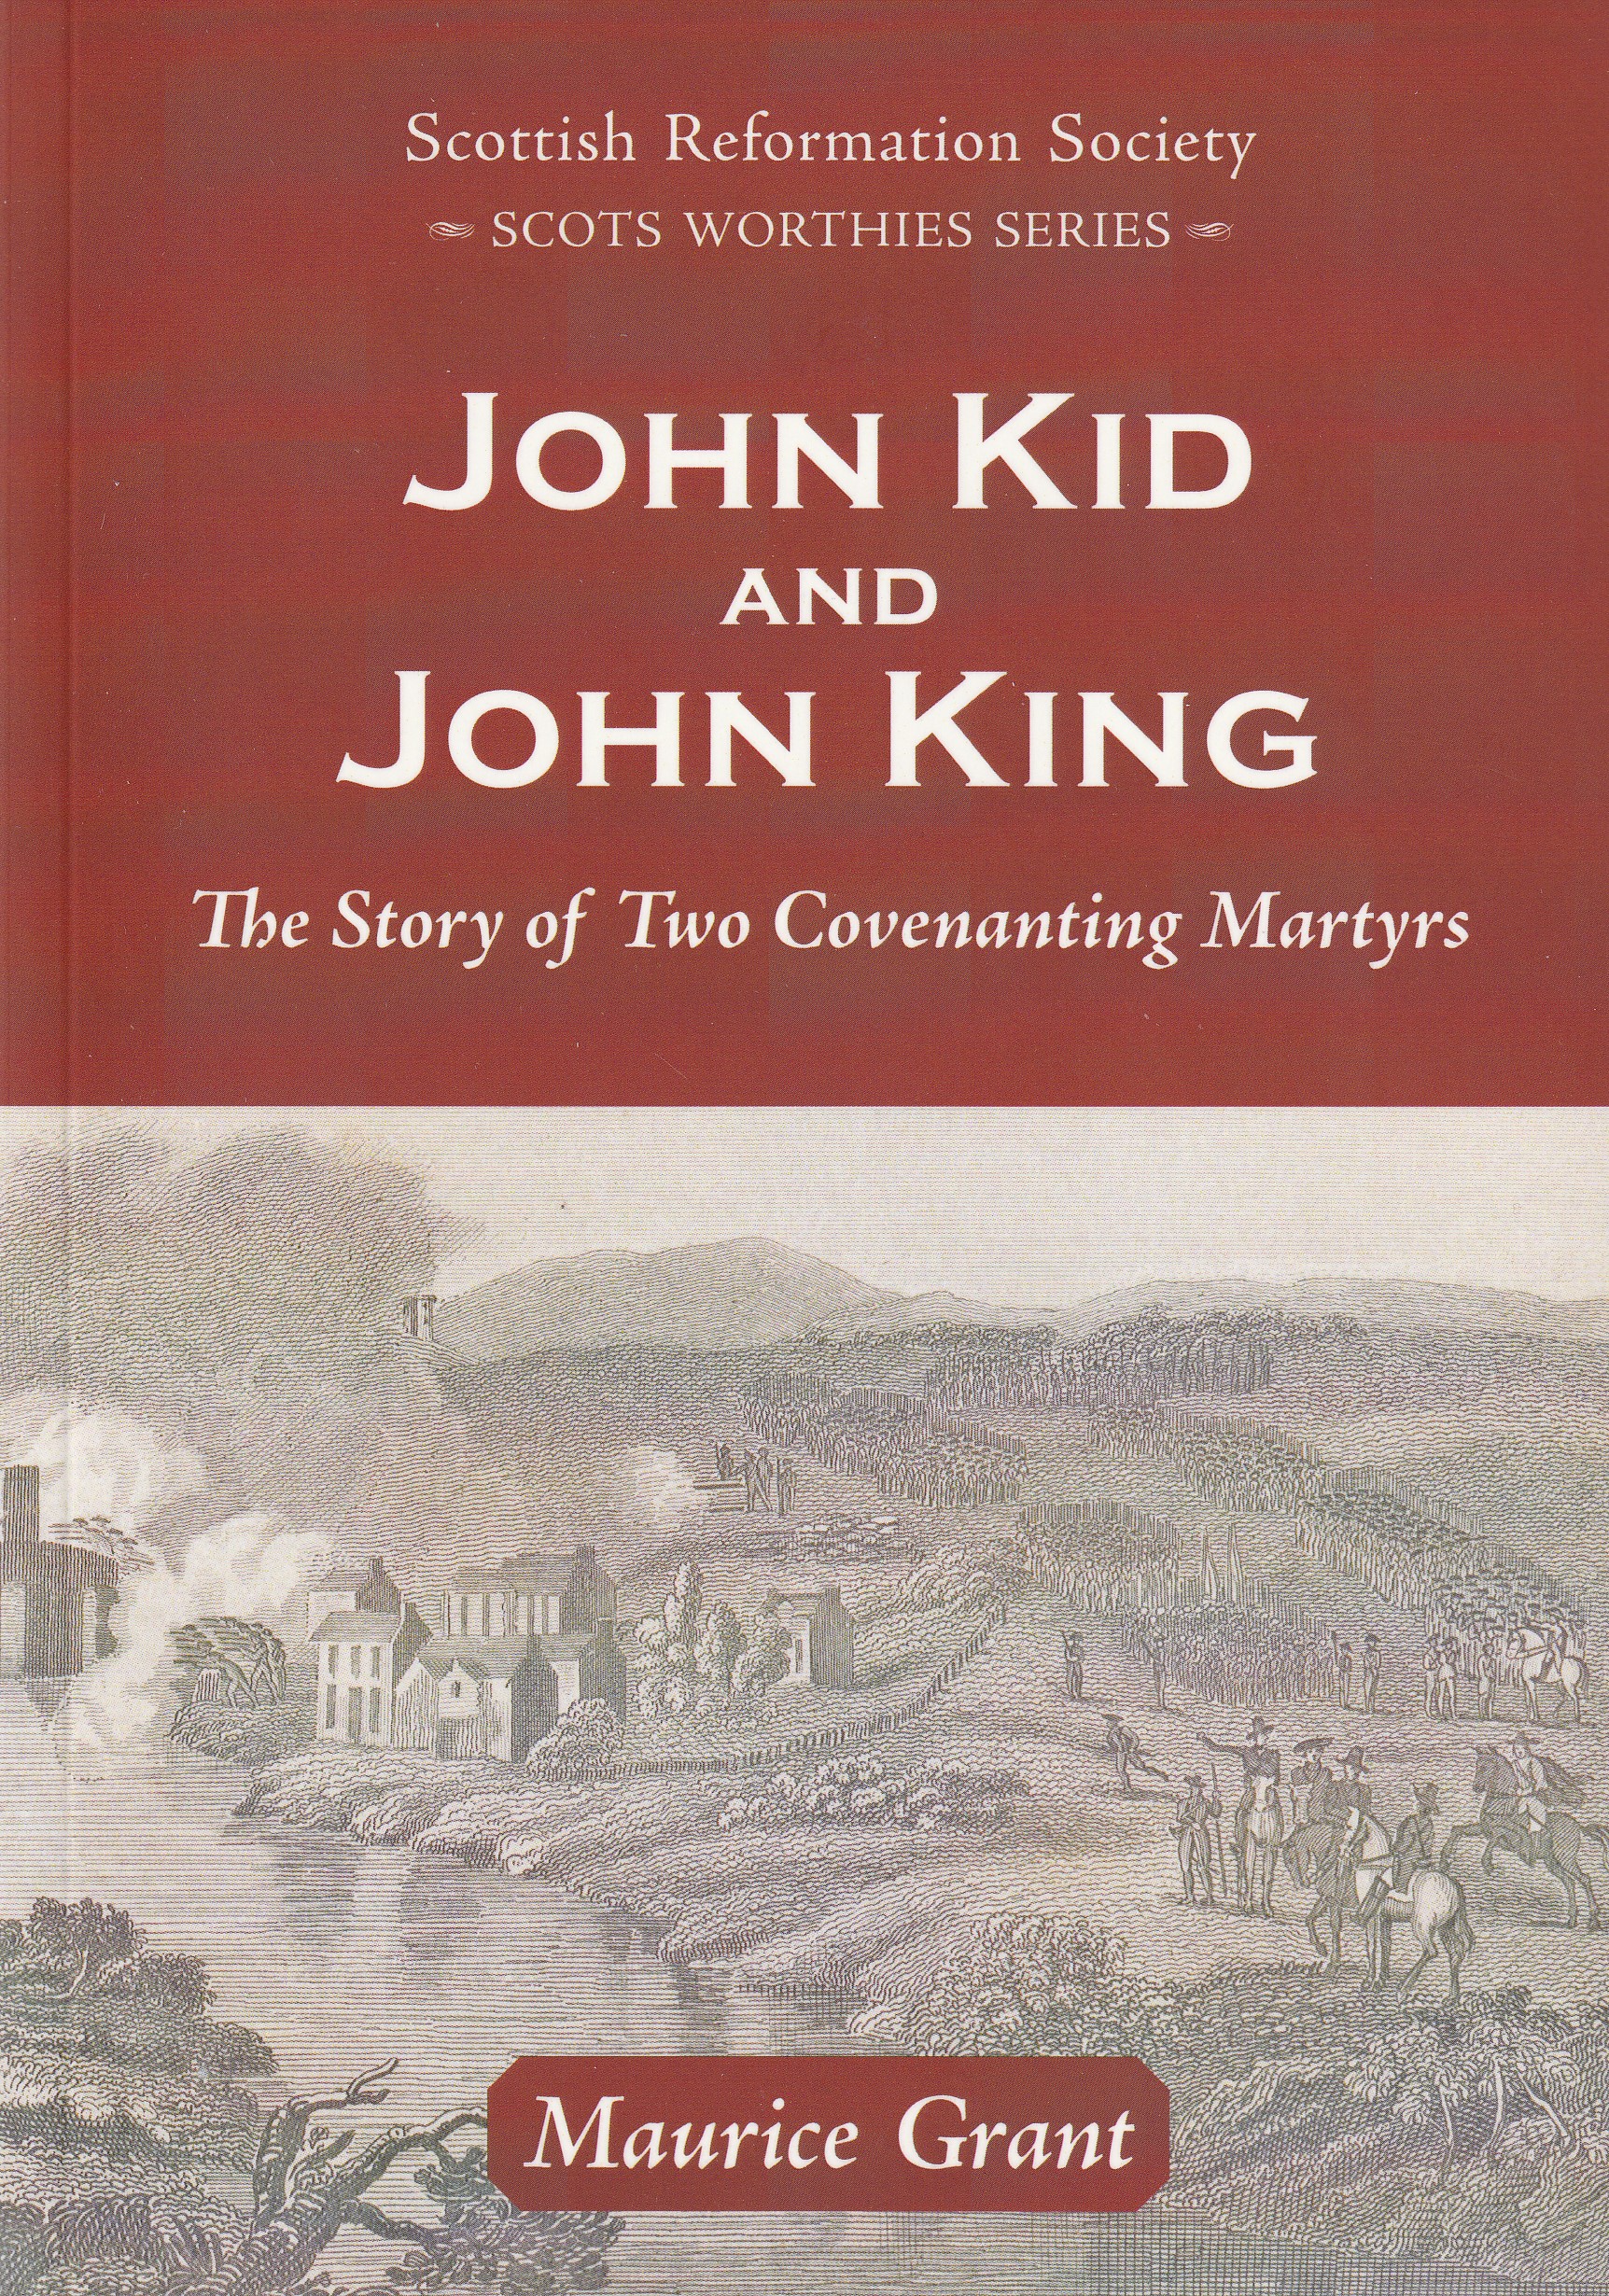 John Kid and John King: The Story of Two Covenanting Martyrs (Scots Worthies Series)